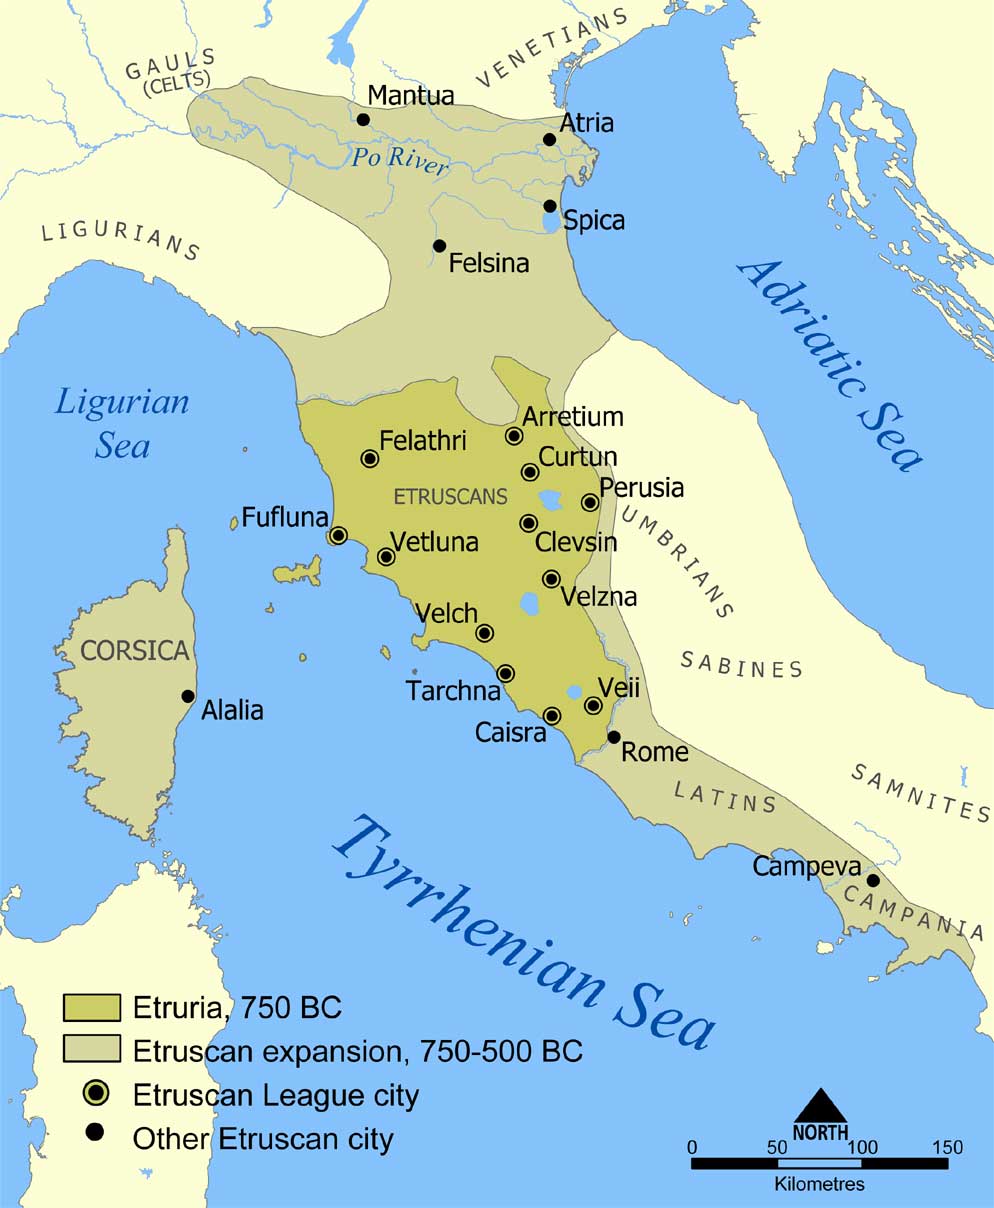 Map of Italy highlighting two zones of Etruscan civilization from 750–500 BCE. The first zone highlights Etruscan civilization in 750 CE in central Italy. The second zone highlights Etruscan civilization stretching from Northern Italy to southwest Italy.